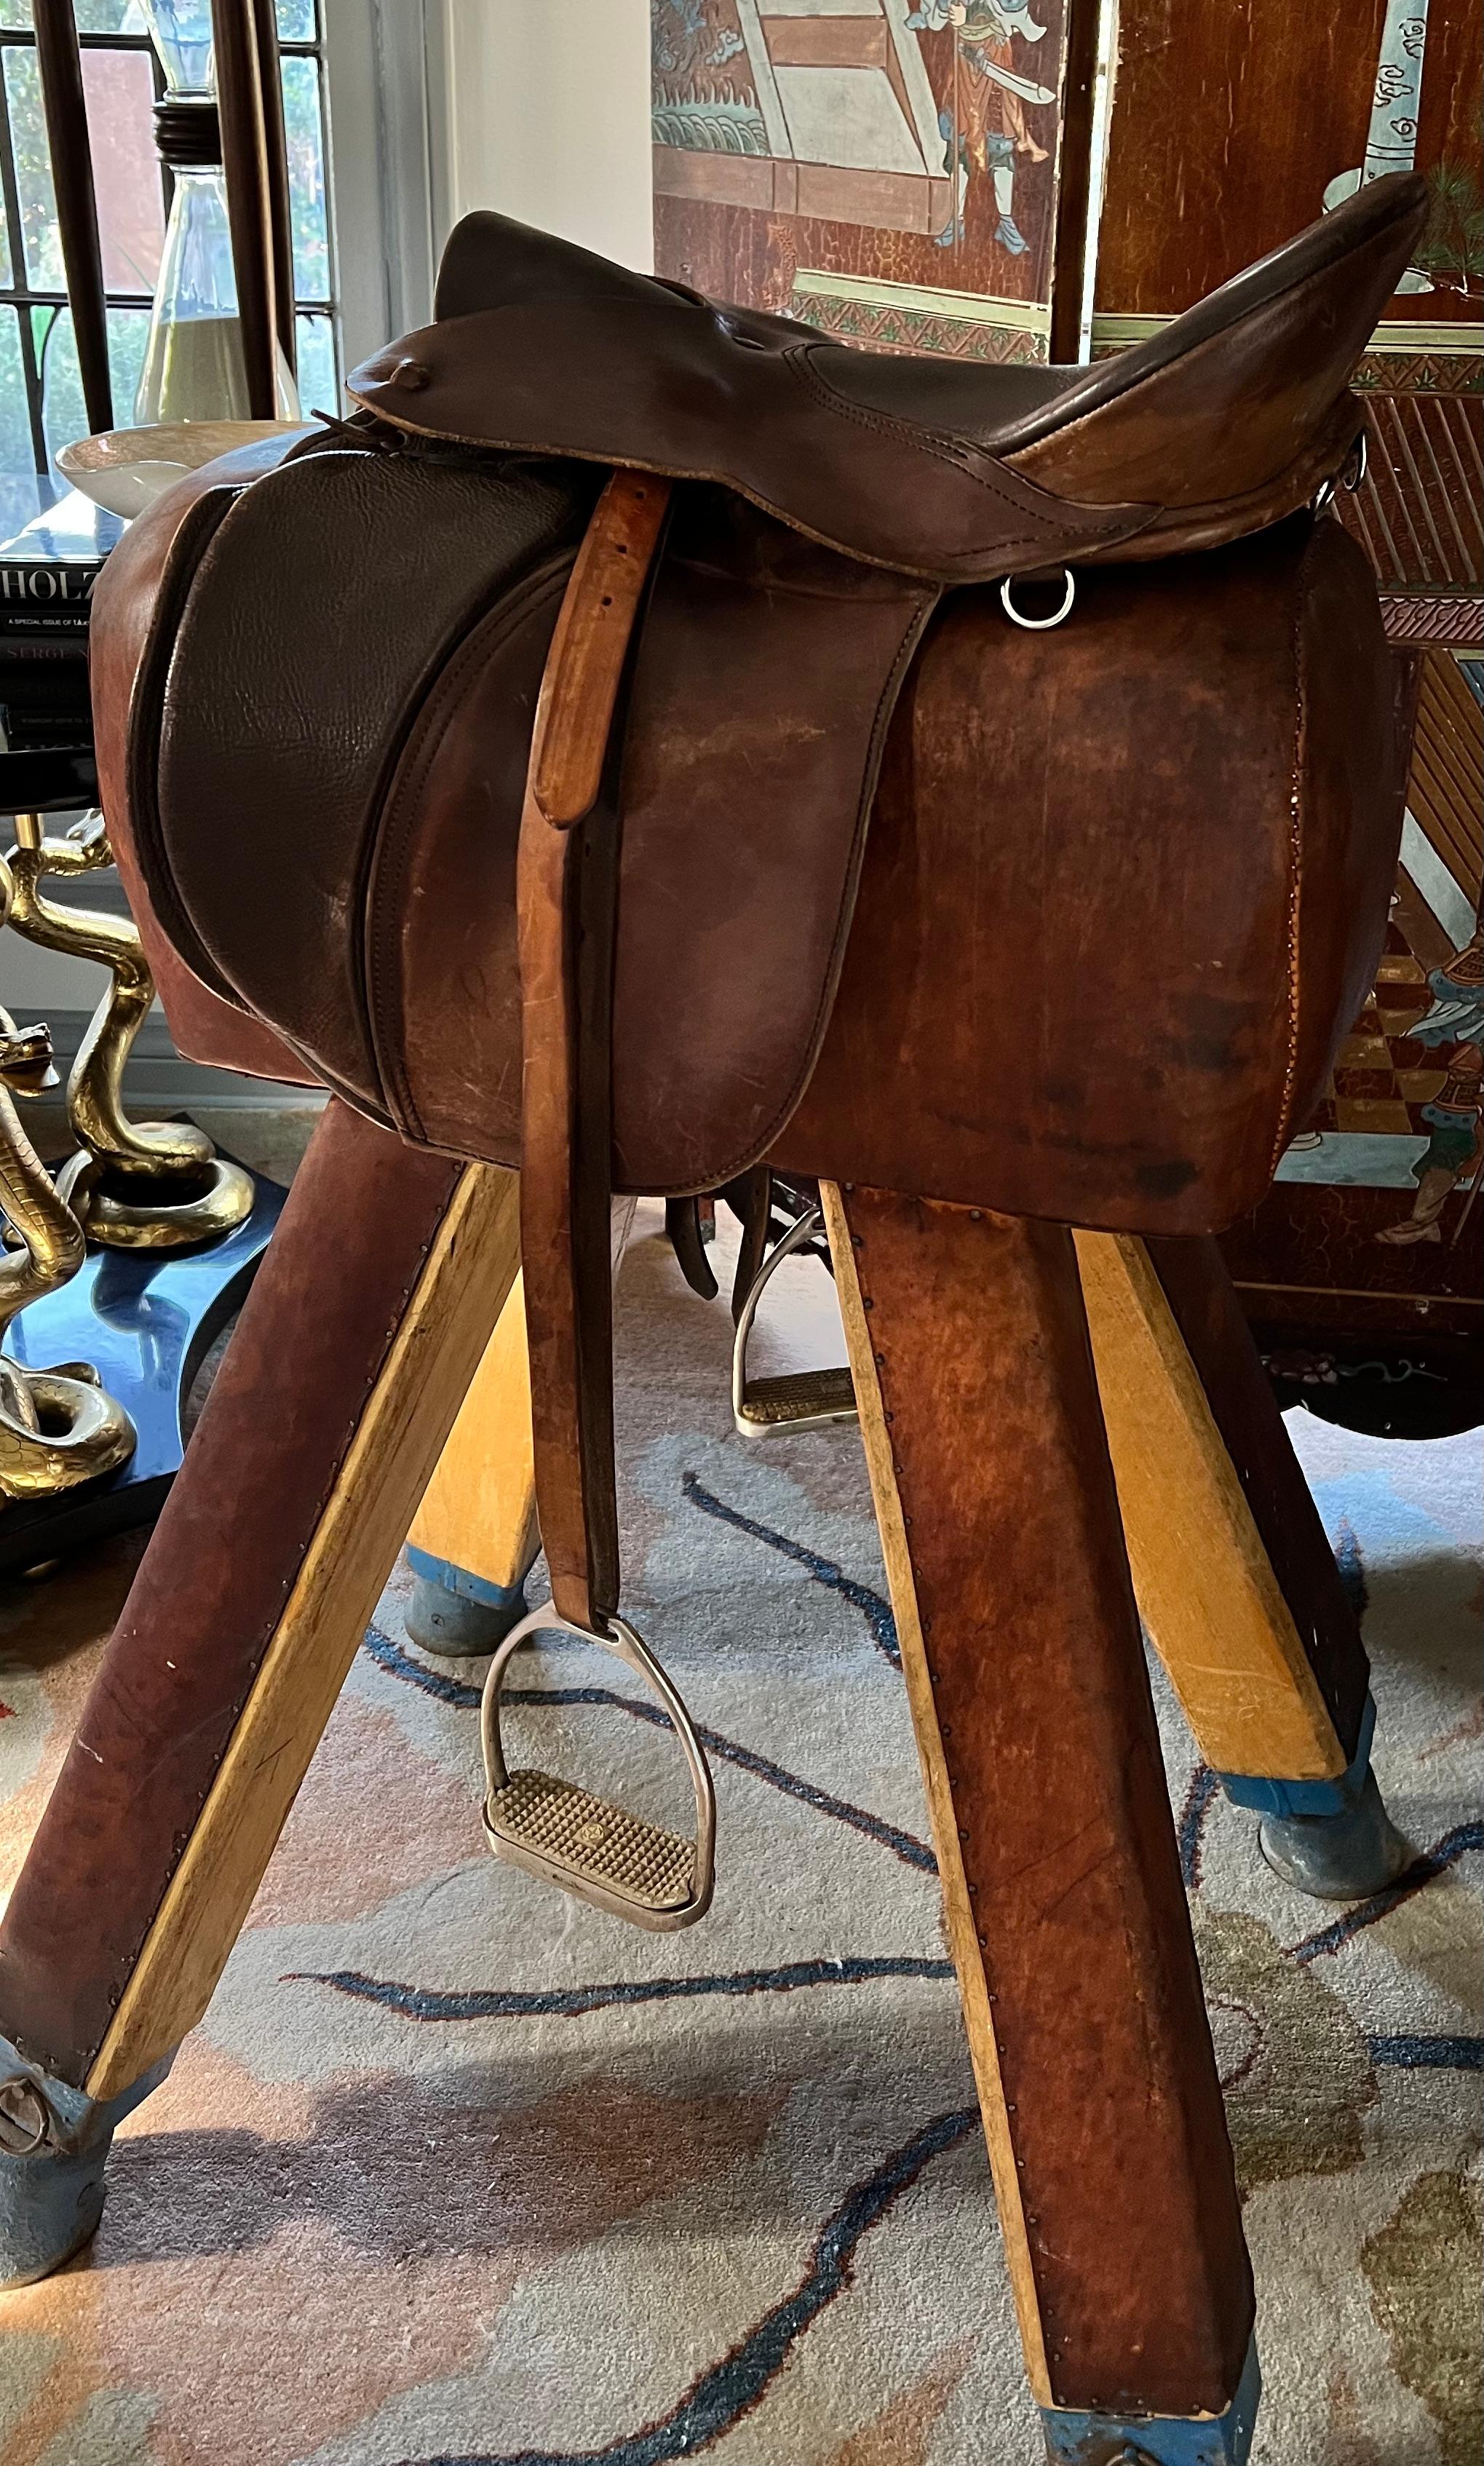 English Riding Saddle - All Leather by the Ansur Saddle Company.   The style is the The Elite...

The piece was acquired from an Estate in Los Angeles - looks to be in great ridablecondition,, however we use and recommend them for decorative